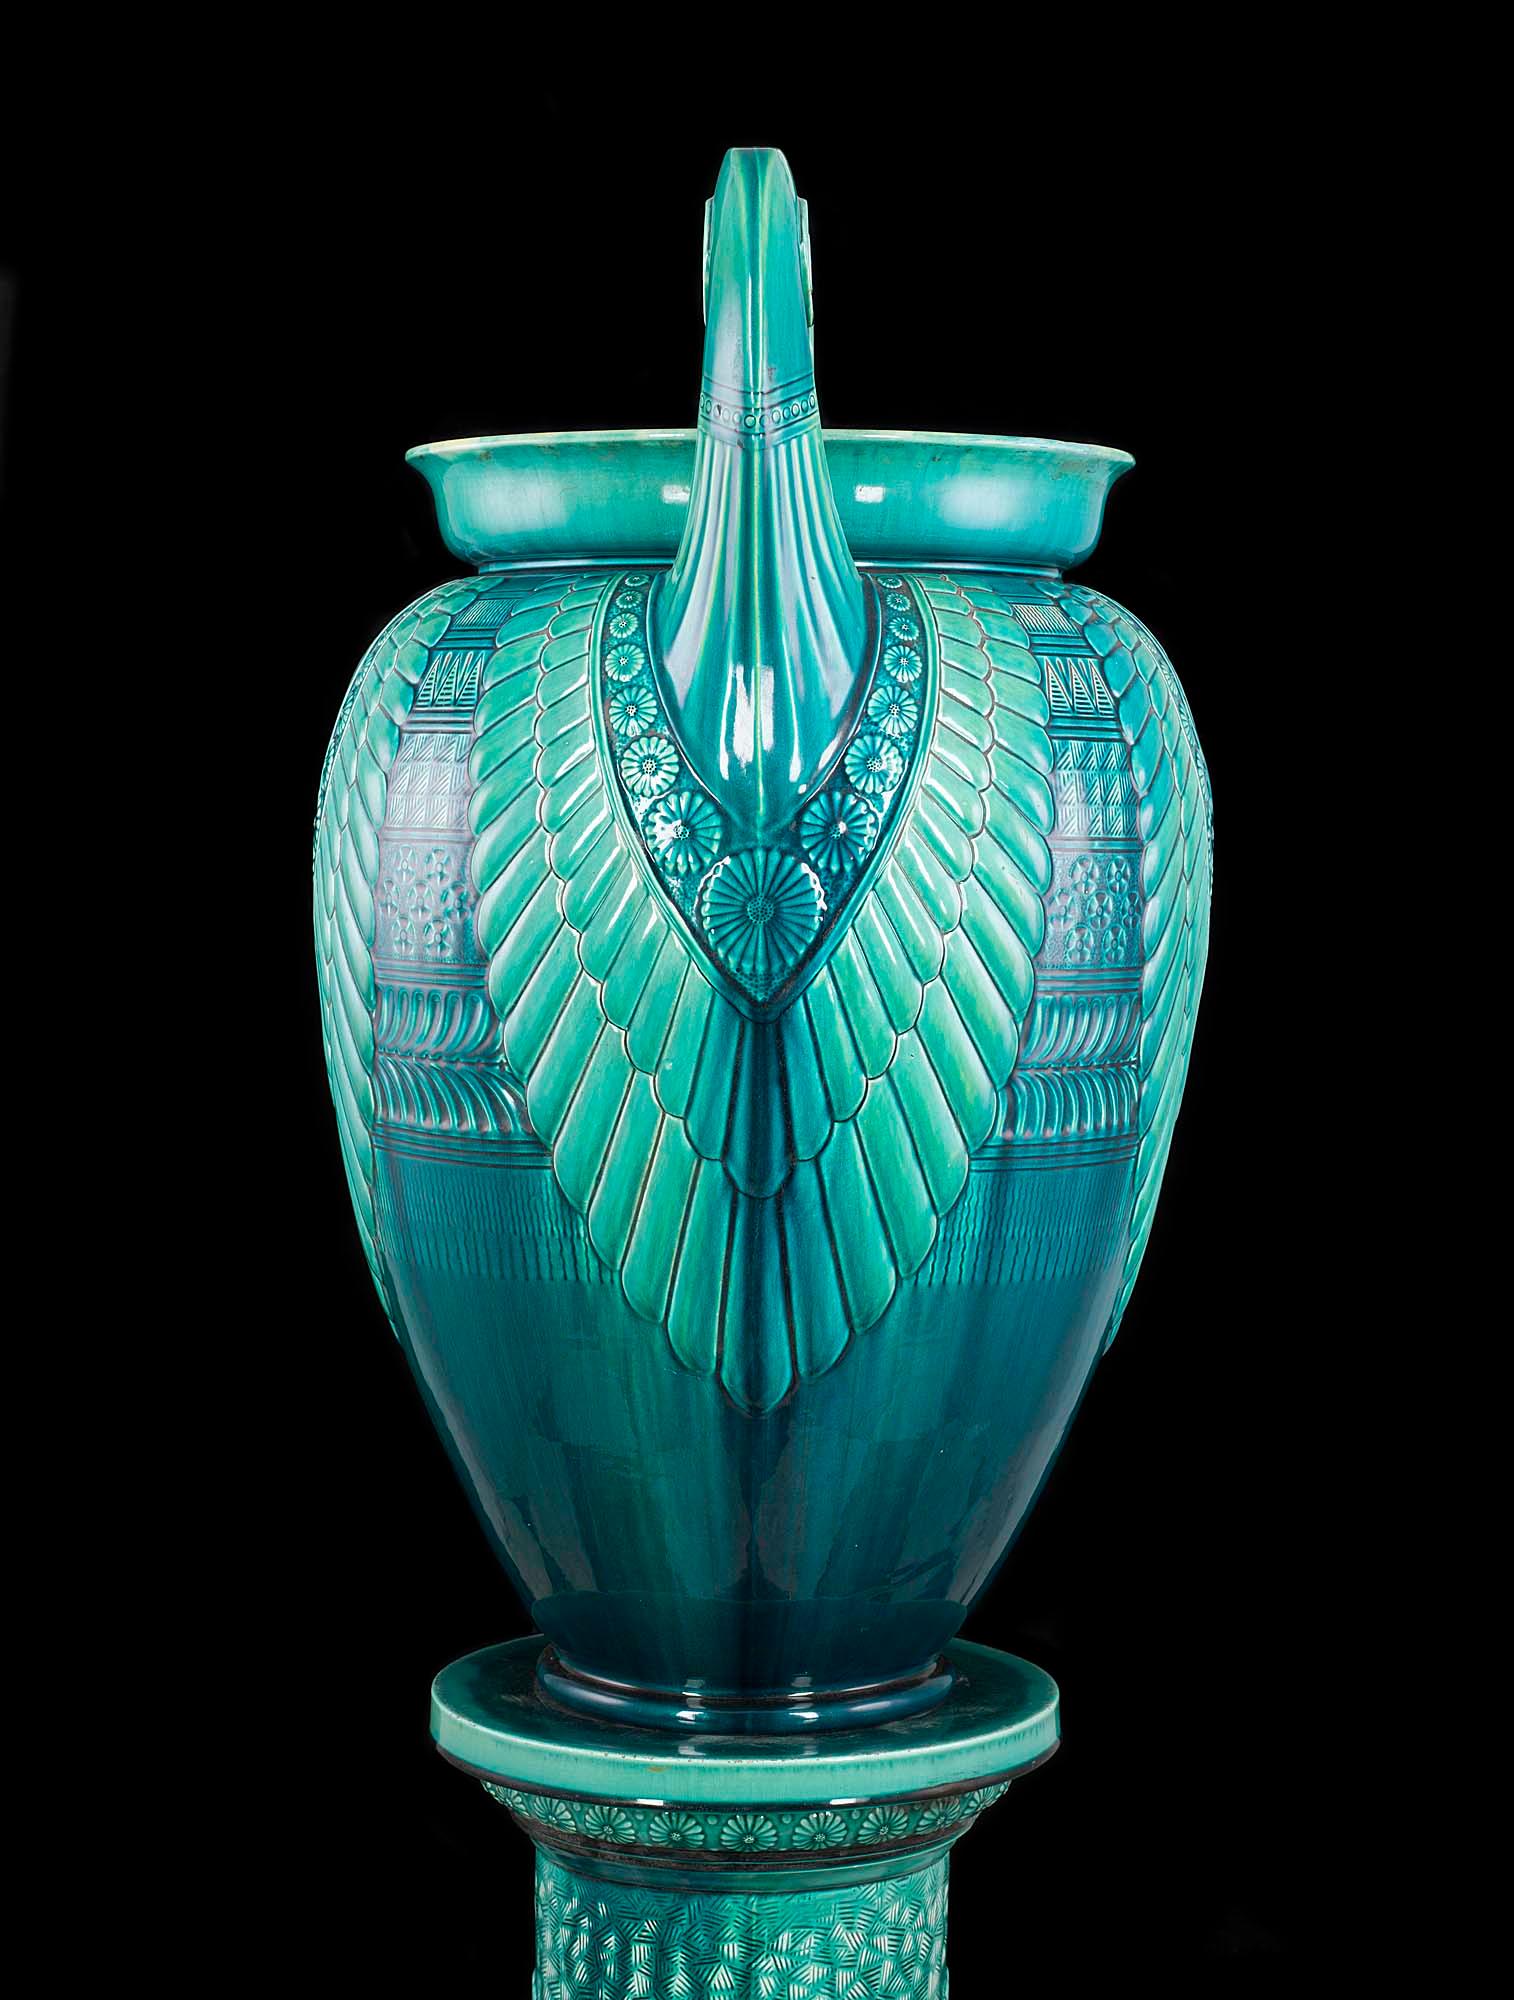 Glazed Turquoise Ceramic Jardinière and Stand Designed by Christopher Dresser 2